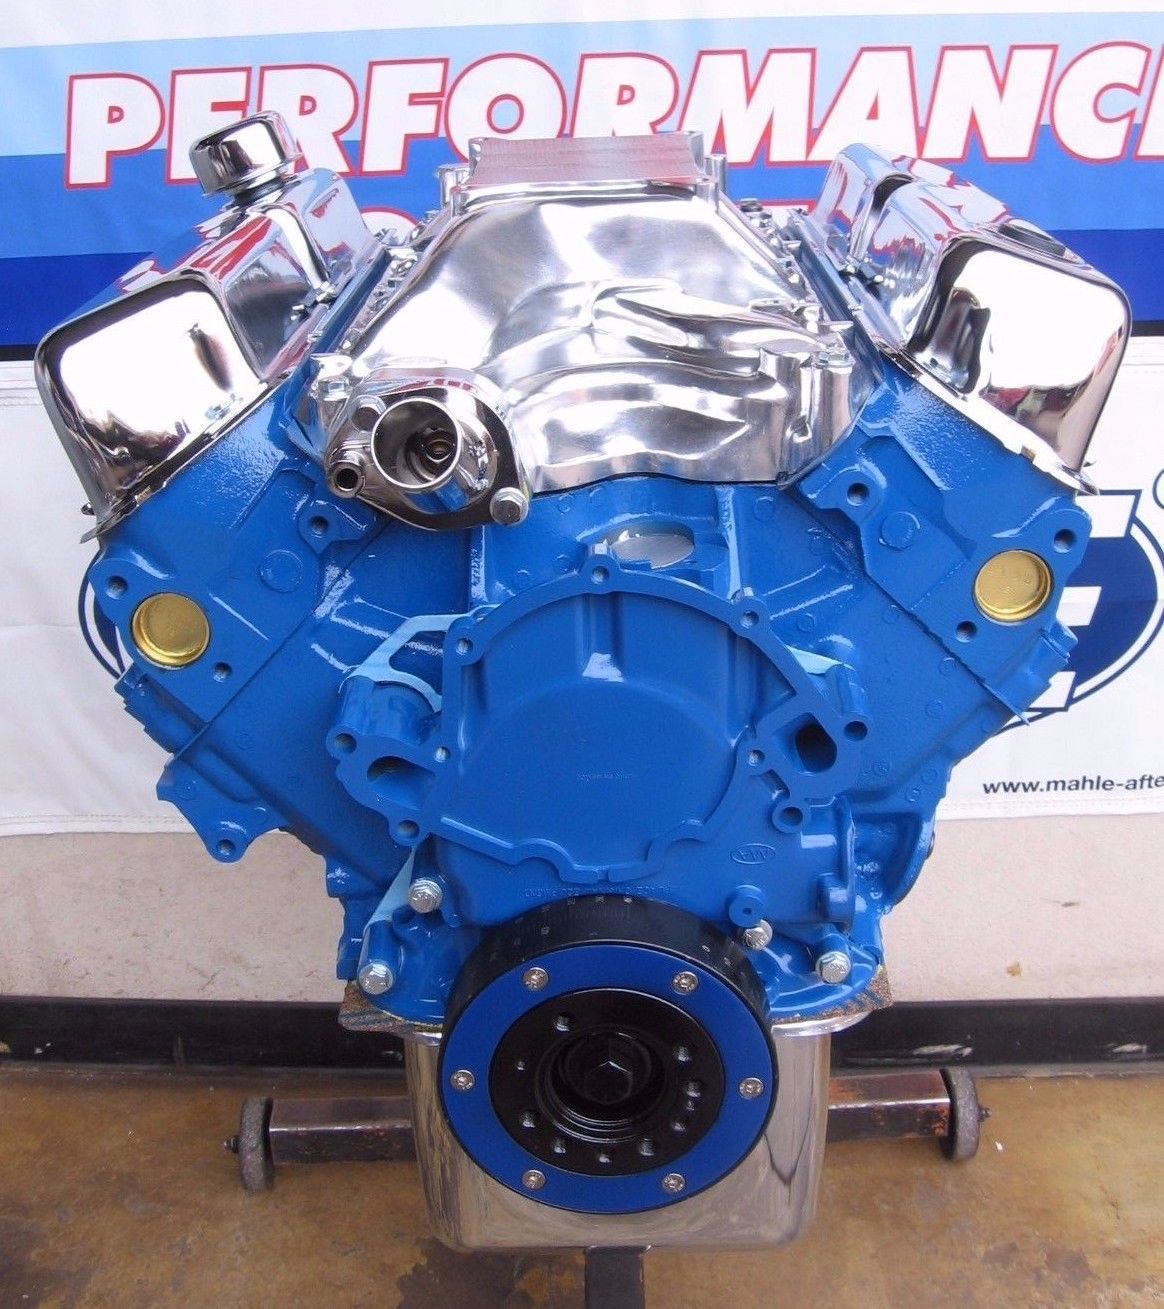 Ford 351W Crate Engine for Sale - Complete, 380HP